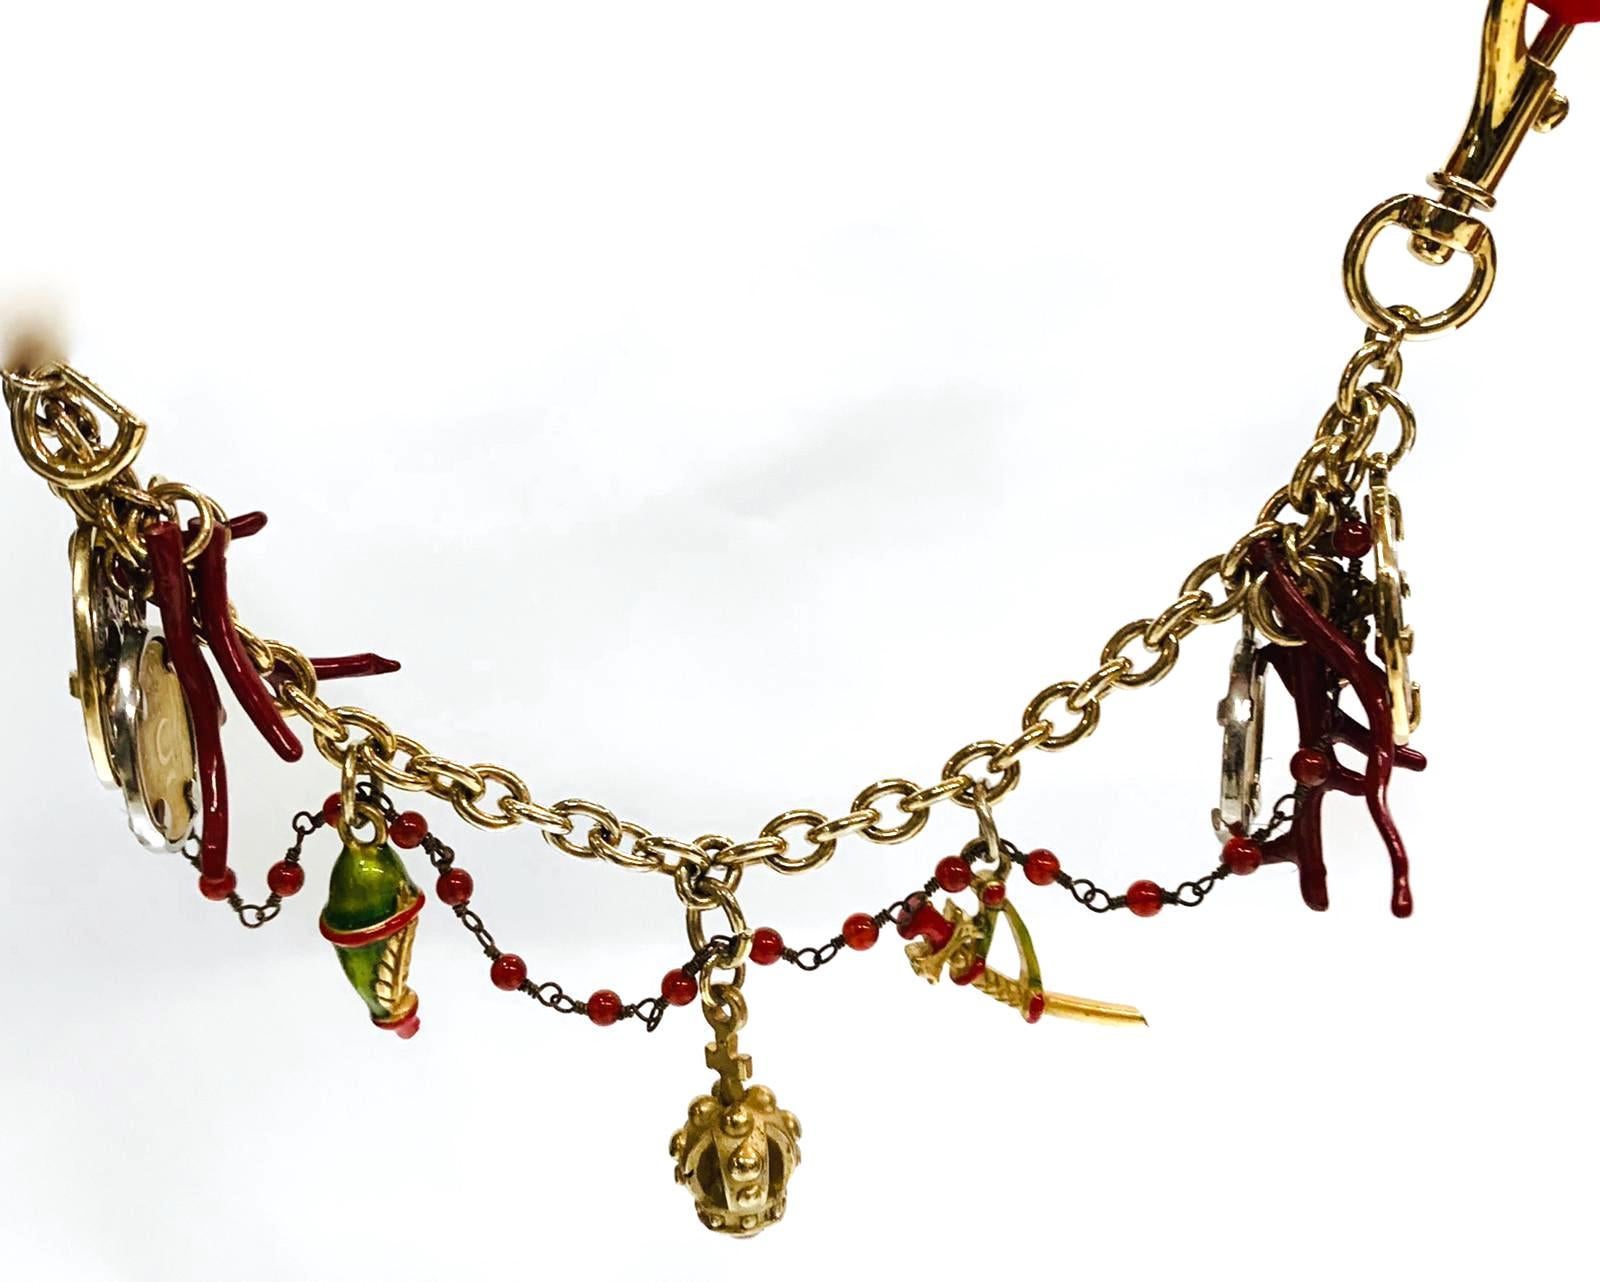 Dolce & Gabbana Charms Bracelet Sicily series, with medals and Sicilian charms including reproduction of red coral.
Length: 20 cm 